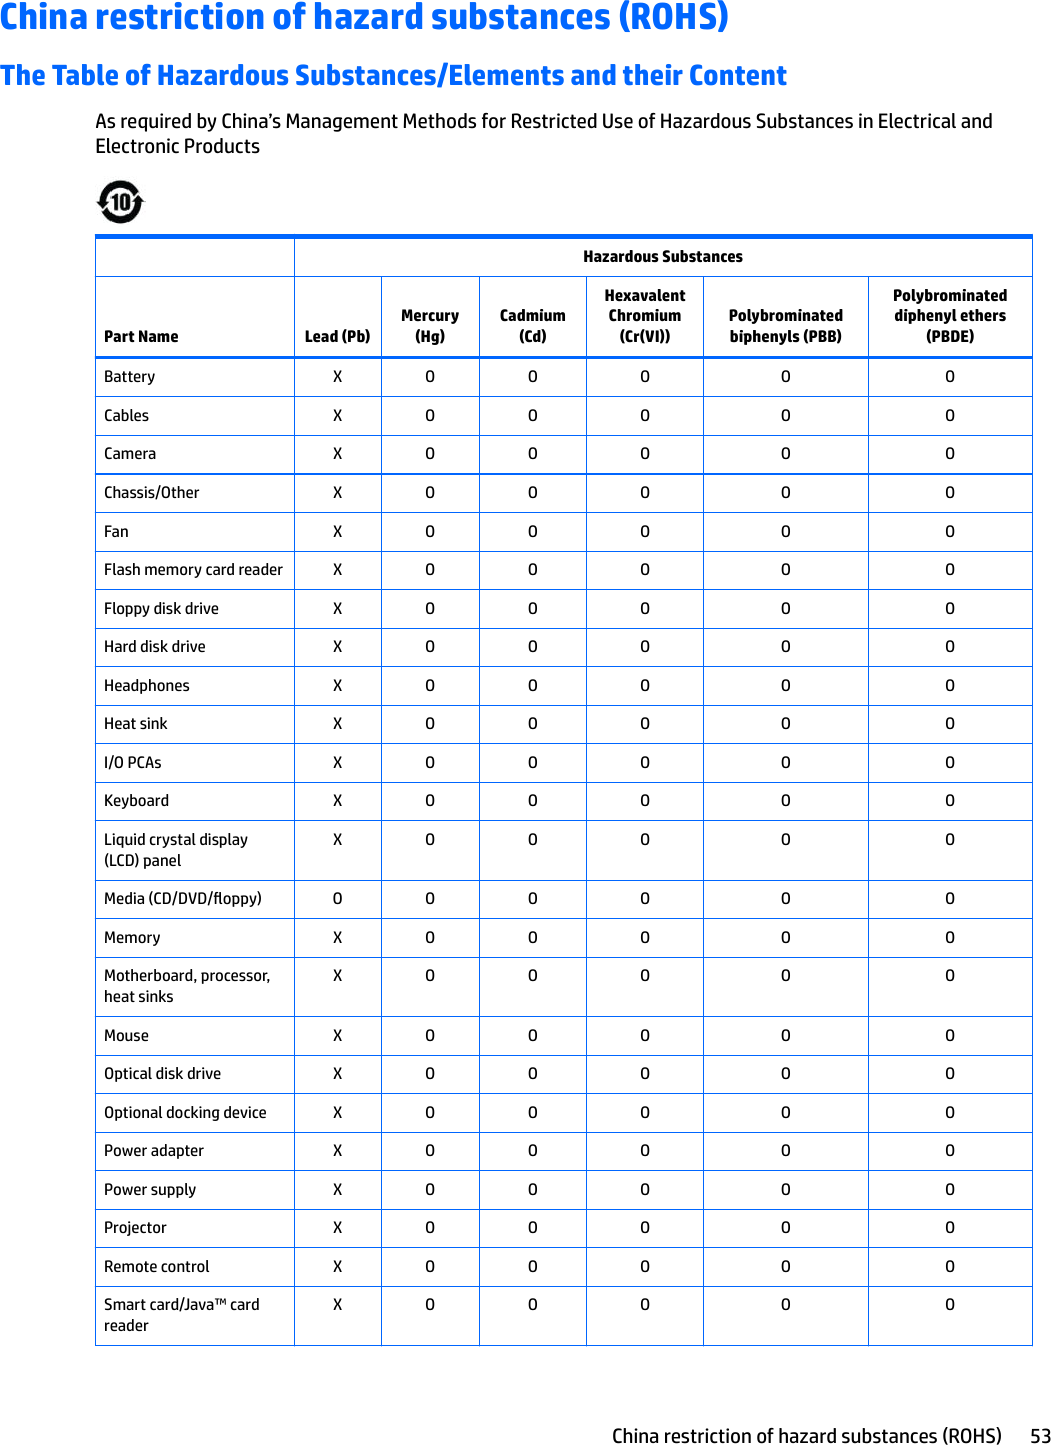 China restriction of hazard substances (ROHS)The Table of Hazardous Substances/Elements and their ContentAs required by China’s Management Methods for Restricted Use of Hazardous Substances in Electrical and Electronic Products  Hazardous SubstancesPart Name Lead (Pb)Mercury (Hg)Cadmium (Cd)Hexavalent Chromium (Cr(VI))Polybrominated biphenyls (PBB)Polybrominated diphenyl ethers (PBDE)Battery X O O O O OCables X O O O O OCamera X O O O O OChassis/Other X O O O O OFan X O O O O OFlash memory card reader X O O O O OFloppy disk drive X O O O O OHard disk drive X O O O O OHeadphones X O O O O OHeat sink X O O O O OI/O PCAs X O O O O OKeyboard X O O O O OLiquid crystal display (LCD) panelX O O O O OMedia (CD/DVD/oppy) O O O O O OMemory X O O O O OMotherboard, processor, heat sinksX O O O O OMouse X O O O O OOptical disk drive X O O O O OOptional docking device X O O O O OPower adapter X O O O O OPower supply X O O O O OProjector X O O O O ORemote control X O O O O OSmart card/Java™ card readerX O O O O OChina restriction of hazard substances (ROHS) 53